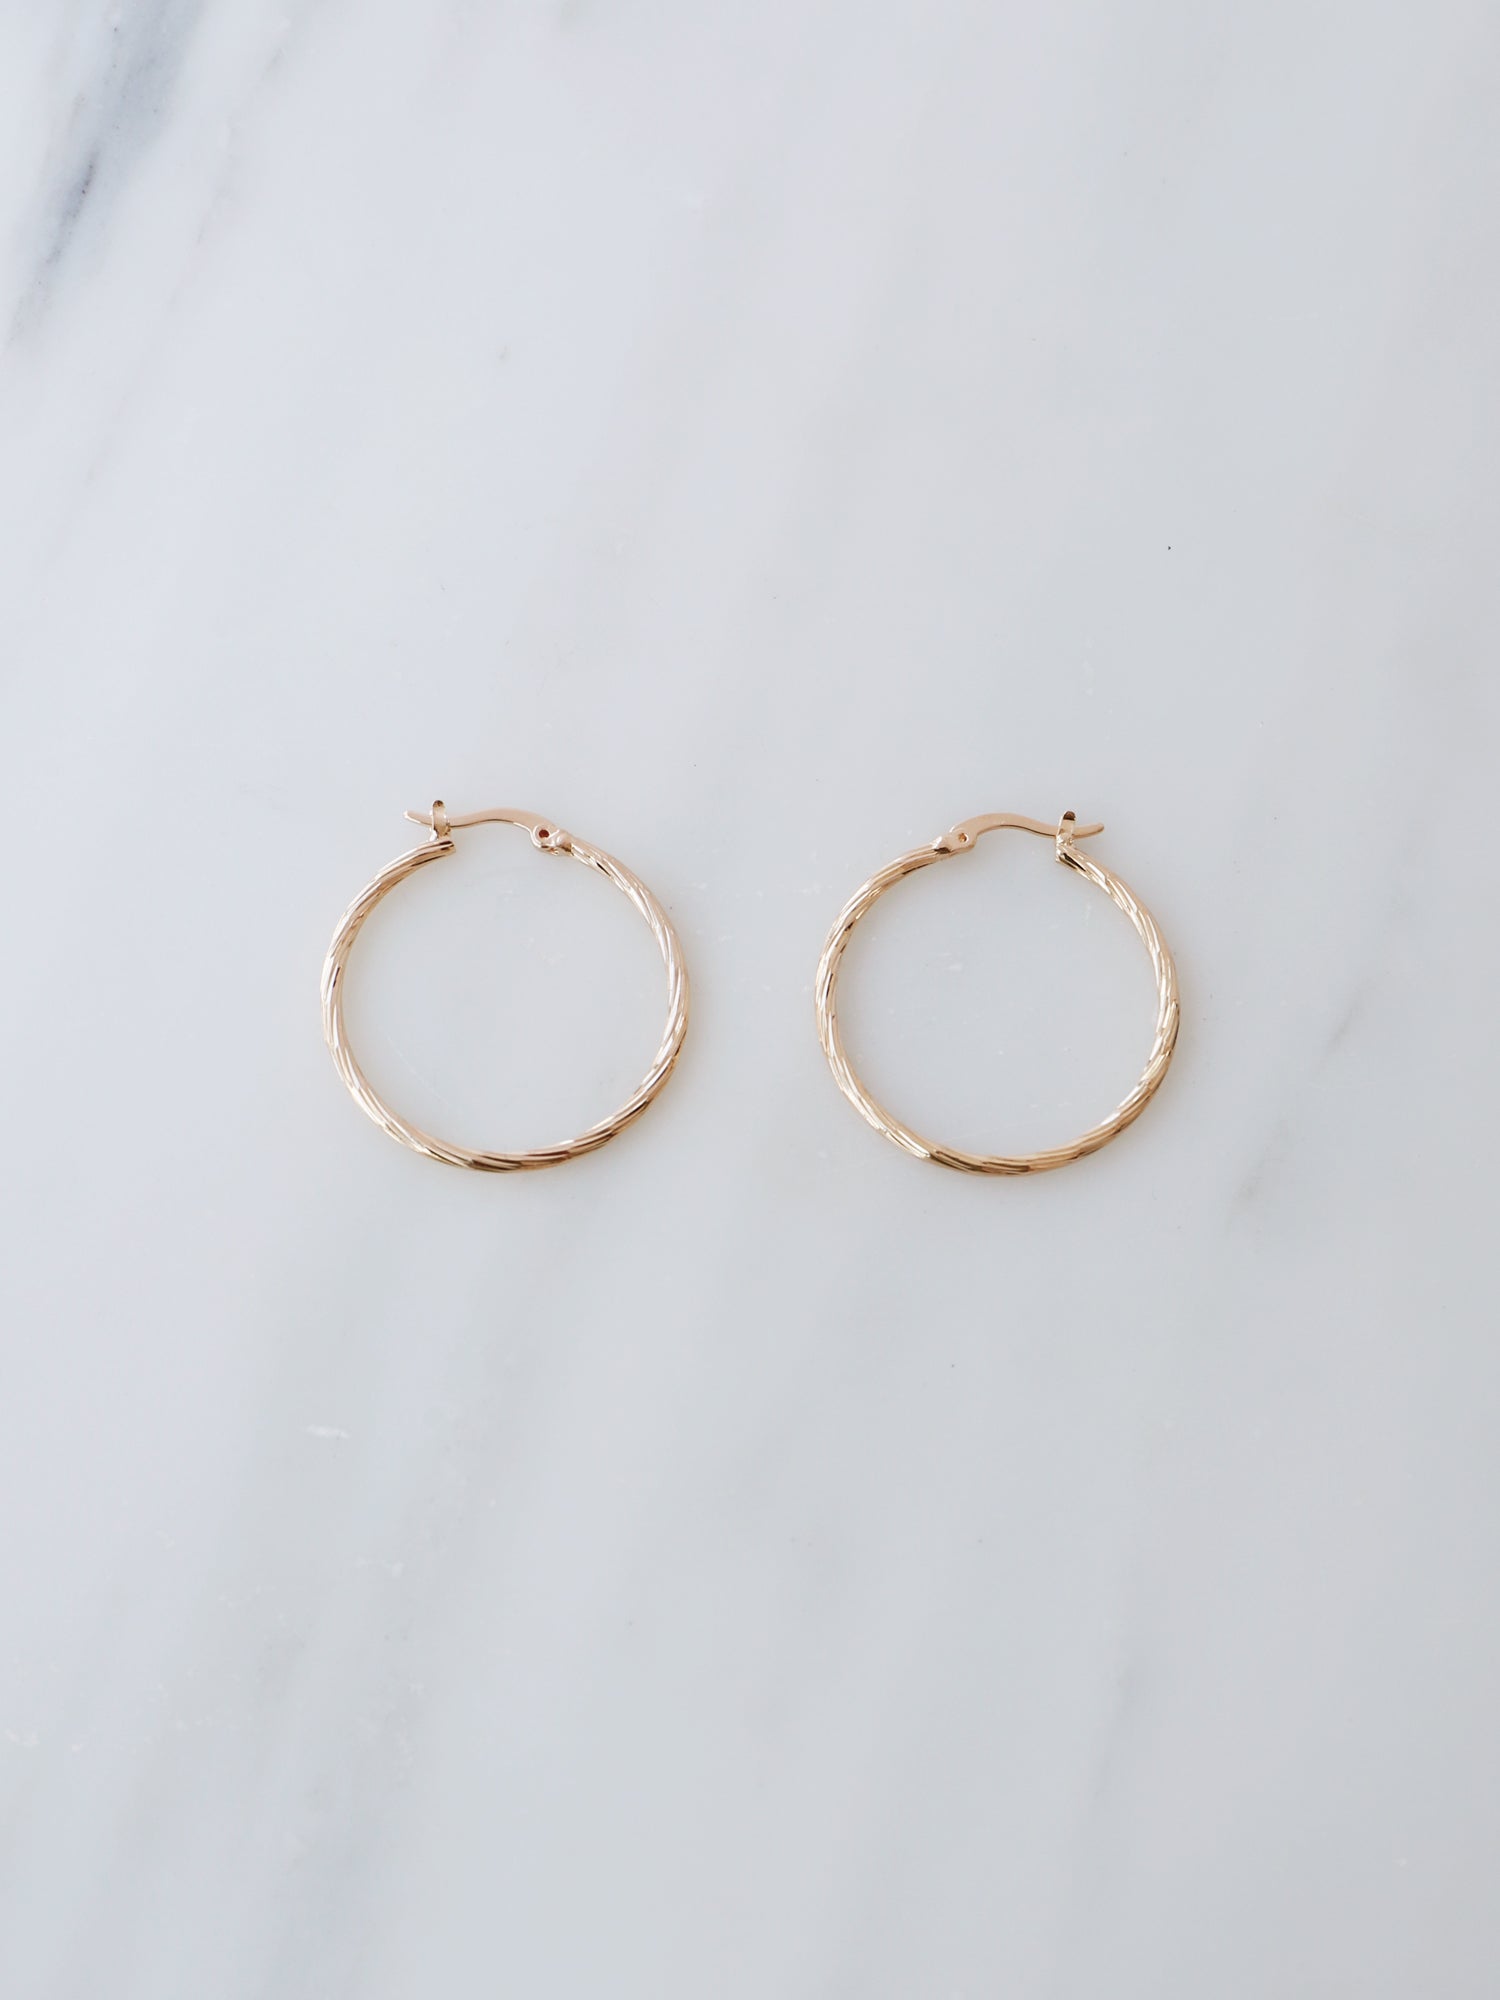 30mm hoops are made from solid brass with a very high quality 3-micron 24k gold-plating. Handmade in France, available from Wolf & Moon. 